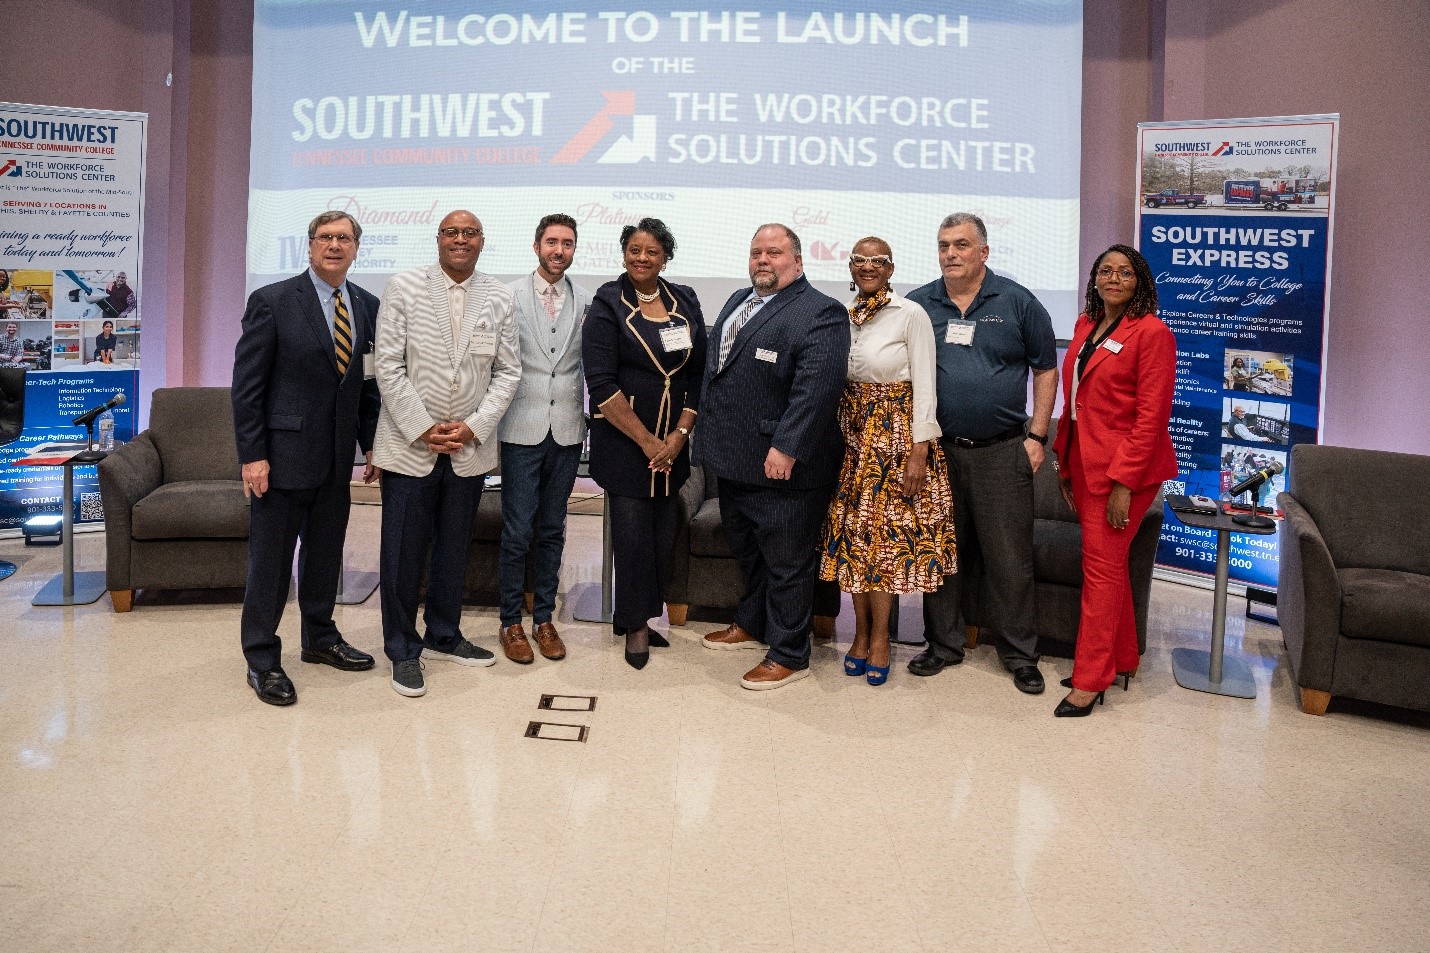 Southwest hosts inaugural Workforce Solution Center Open House and Career Fair 